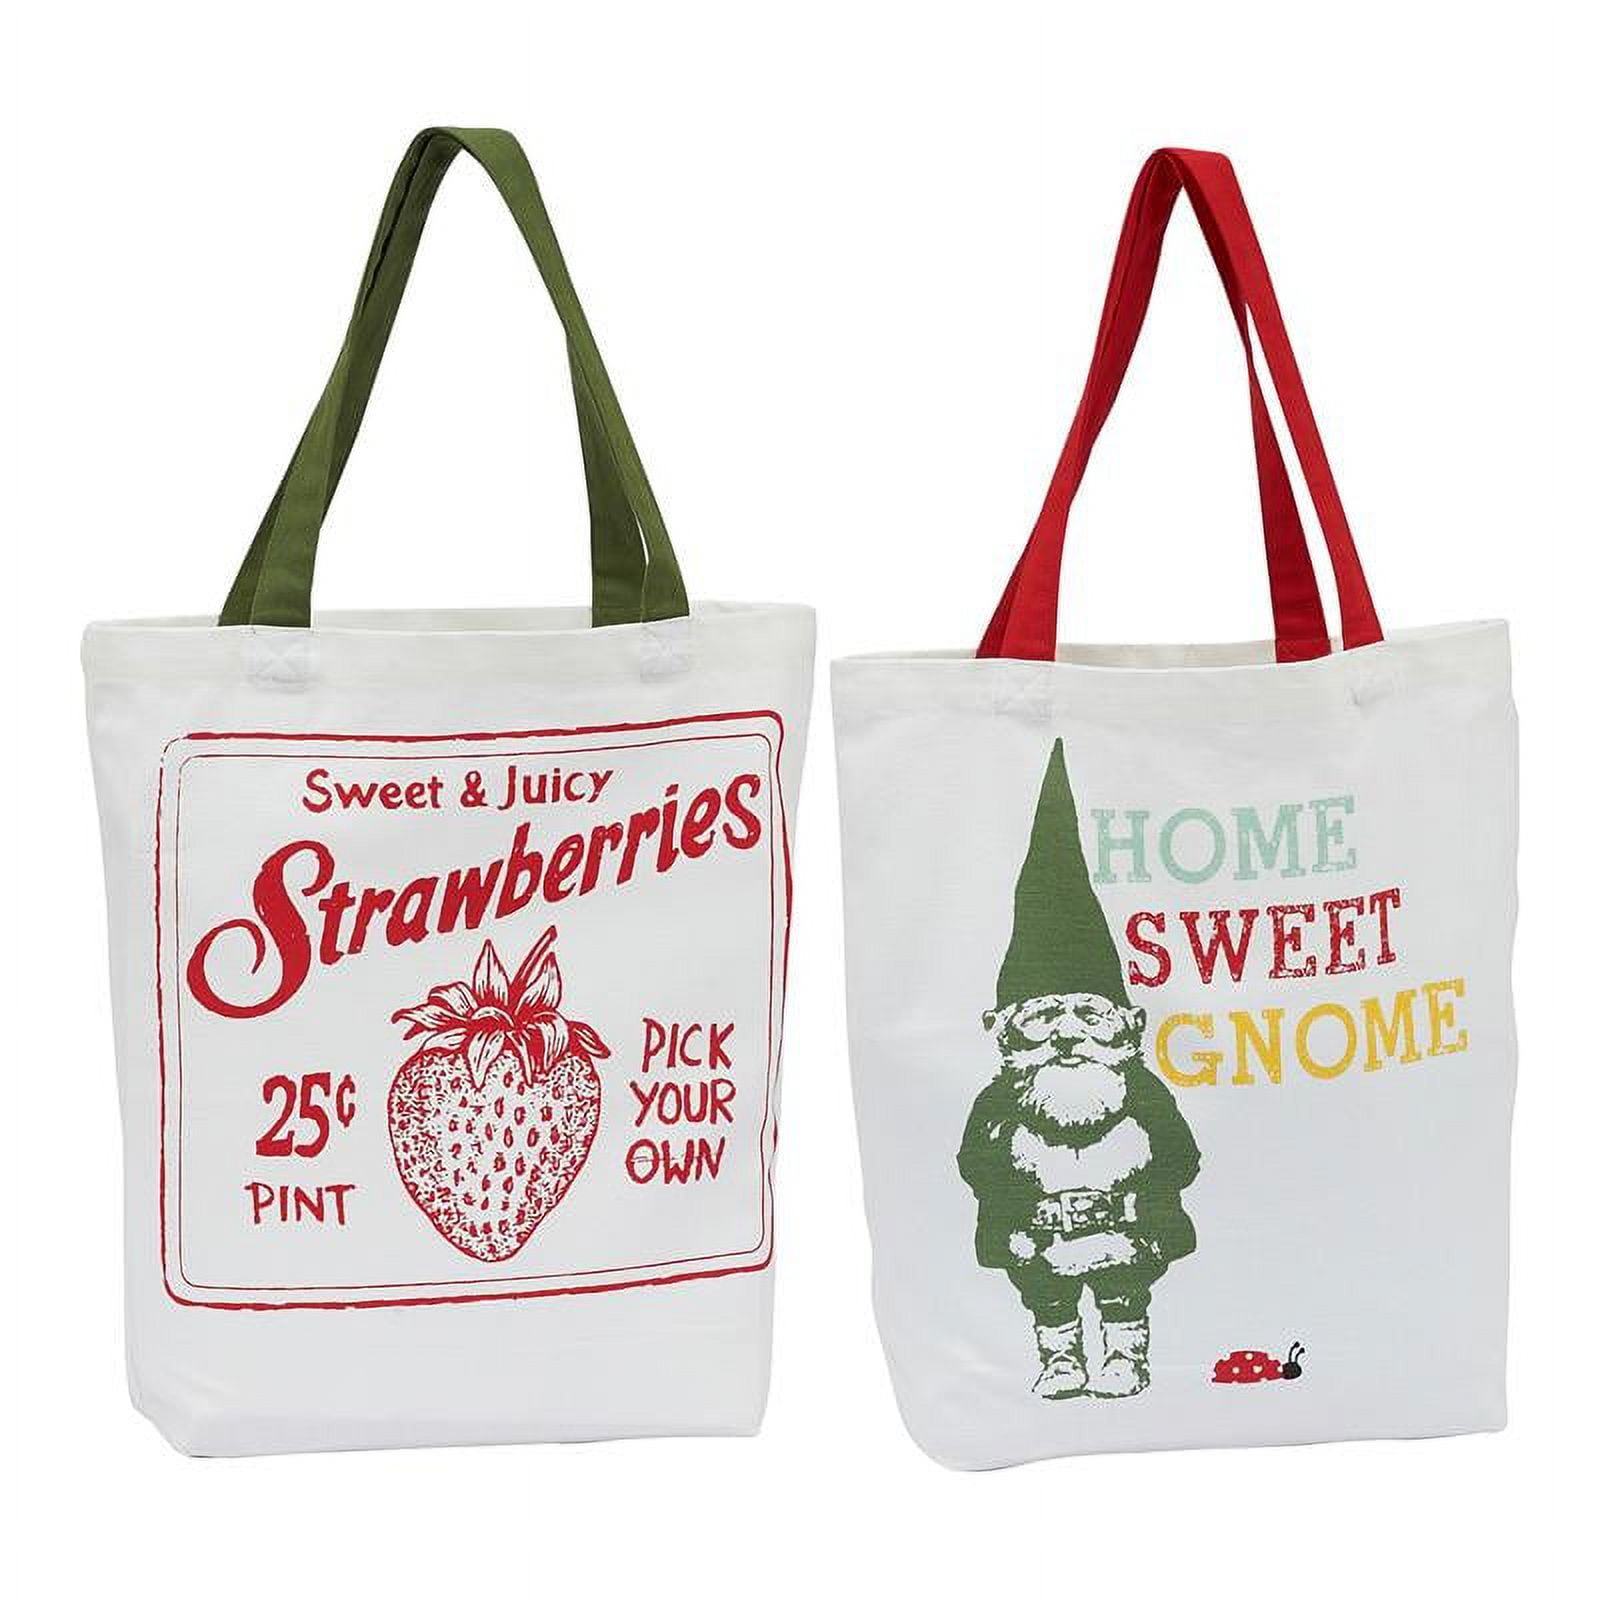 Tripumer 2-Pack Blank Canvas Tote Bags Bulk Shopping Bag for